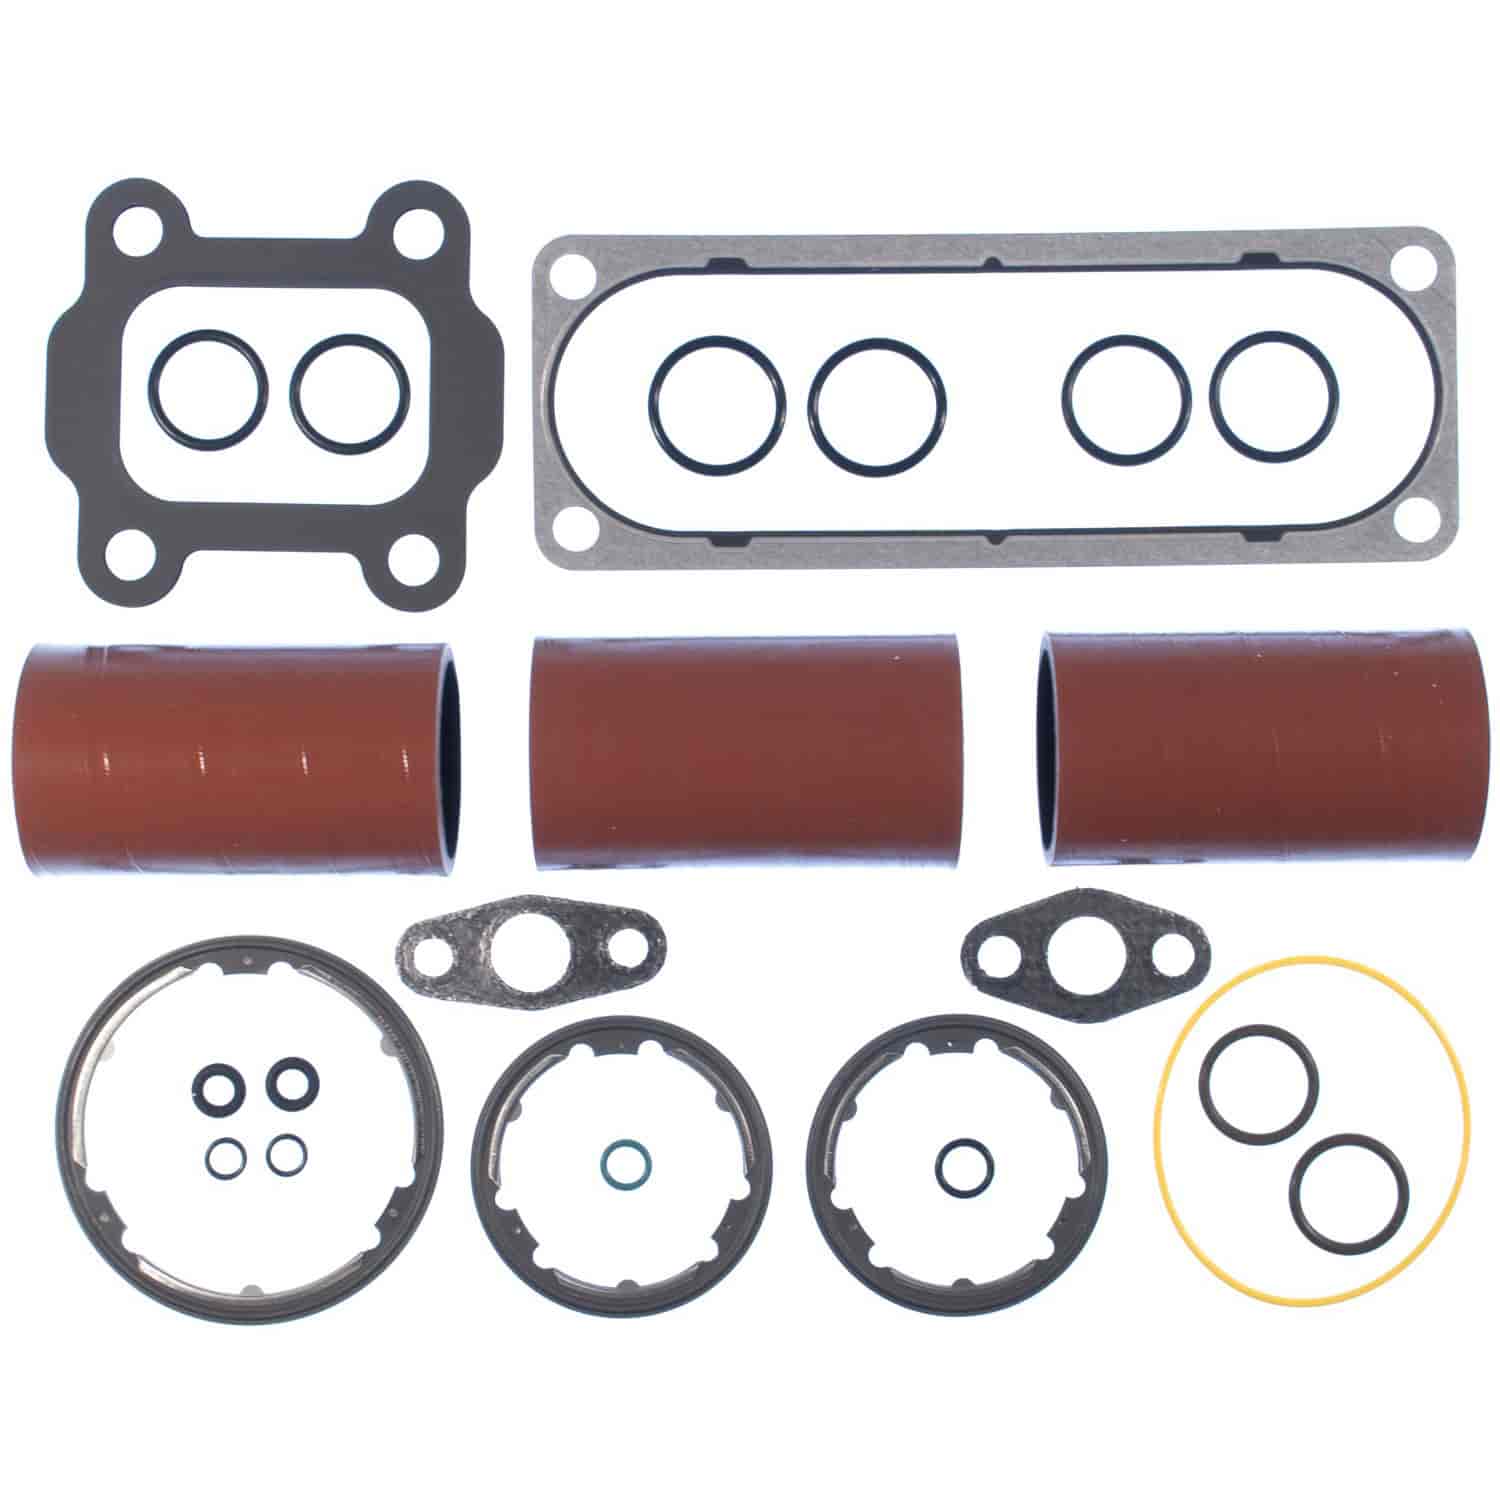 Exhaust Gas Recirculation Cooler Gasket for Cummins ISX EGR Cooler Removal and Replacement Gasket Set